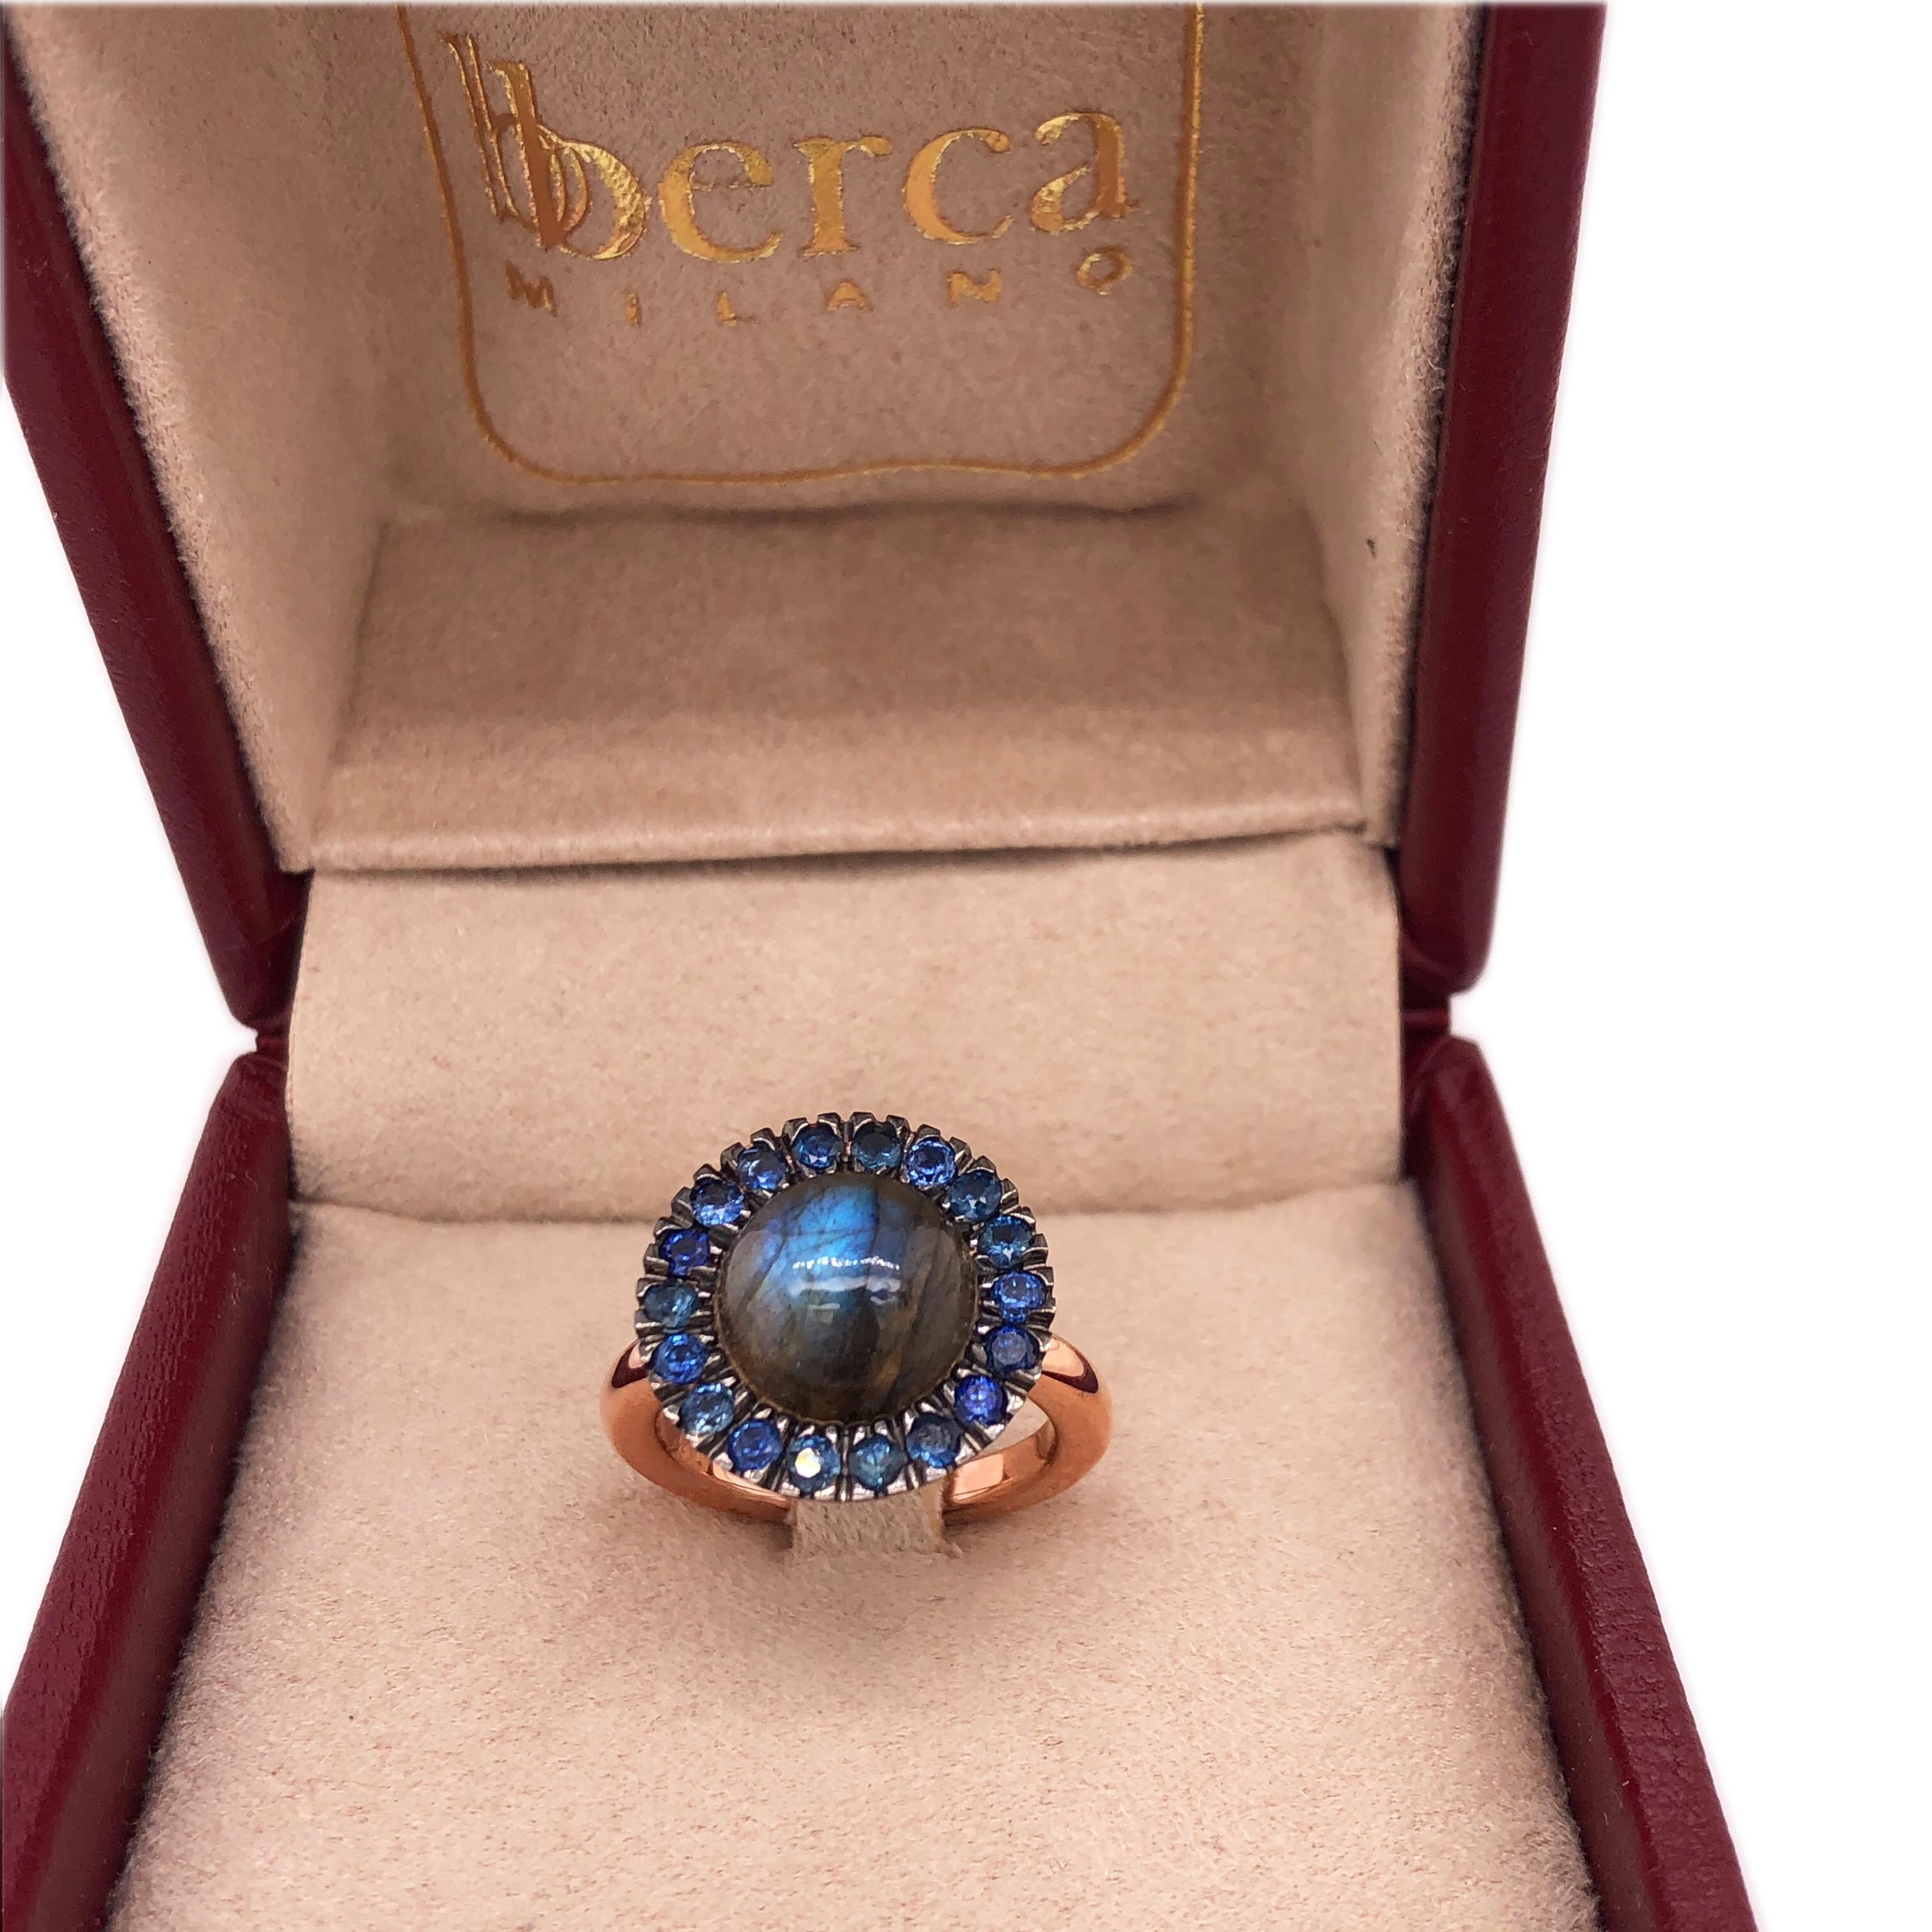 Chic, Unique yet Timeless Contemporary Cocktail Ring featuring a Natural Blue-Teal Color Changing Labradorite Cabochon surrounded by 1.16Kt Natural Blue Sapphire in an elegant Rose and Black Gold Setting: a Stunning, Magical Piece.
In our smart